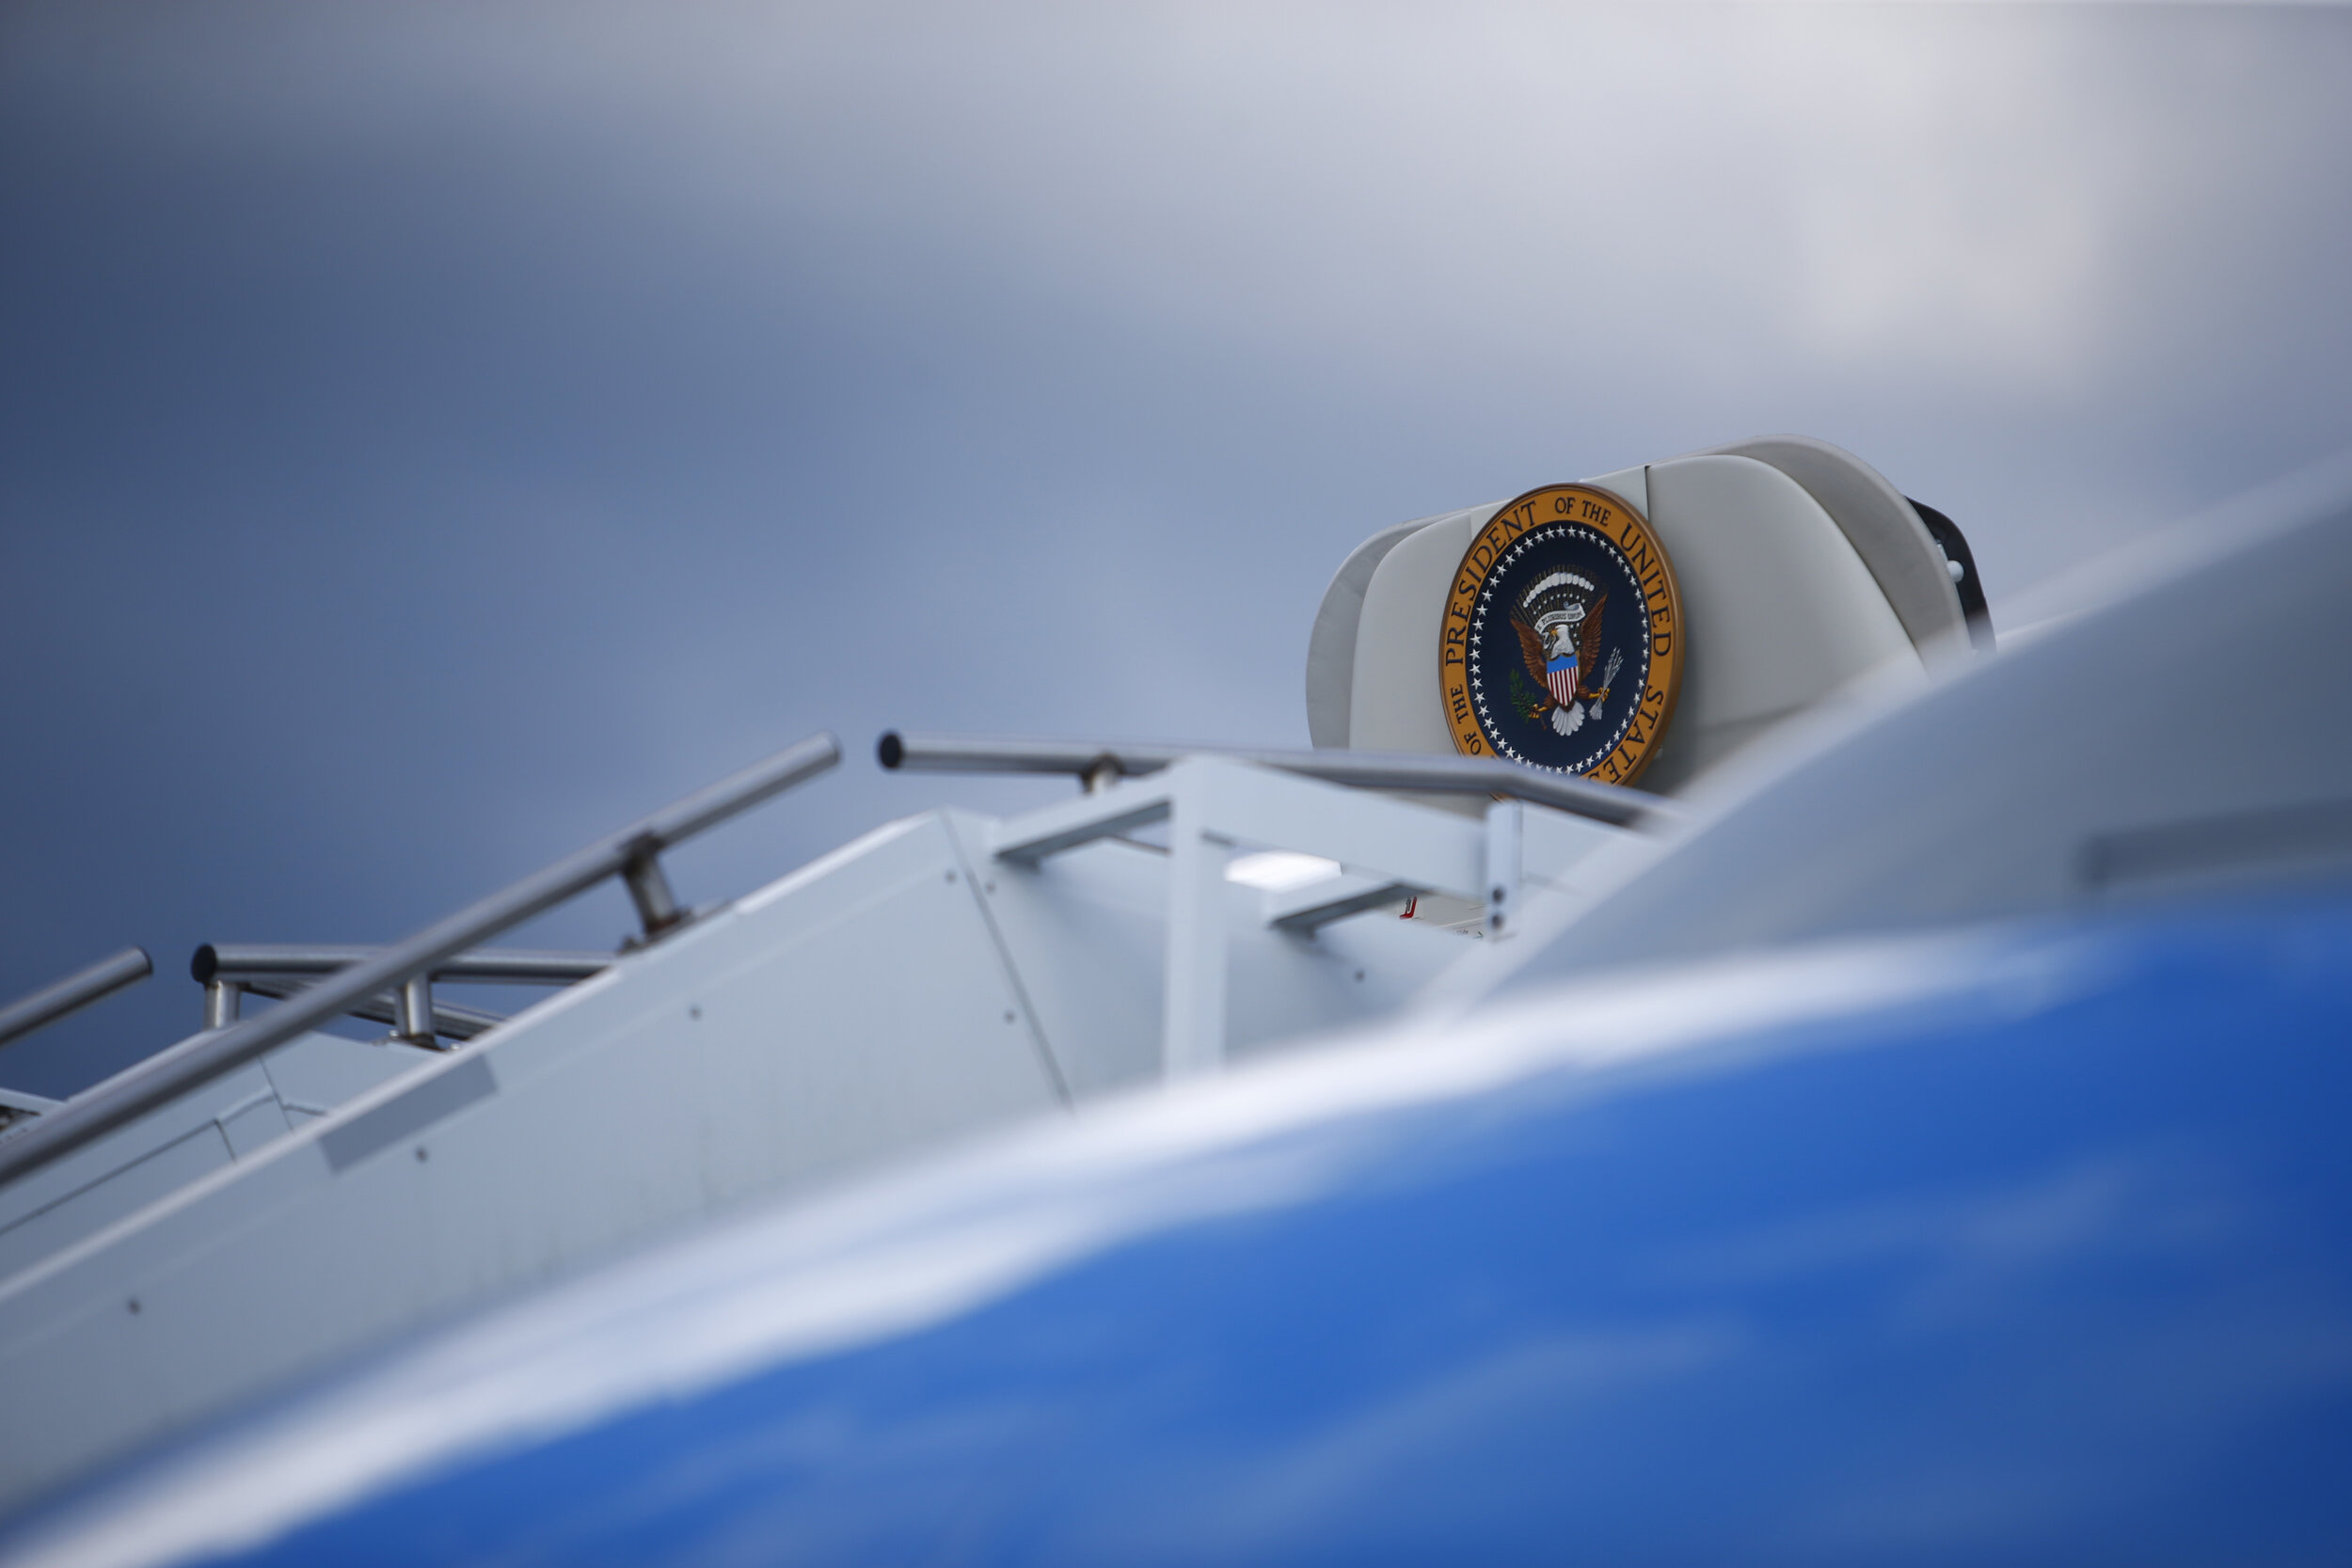   Air Force One, Morristown, NJ. 2018  